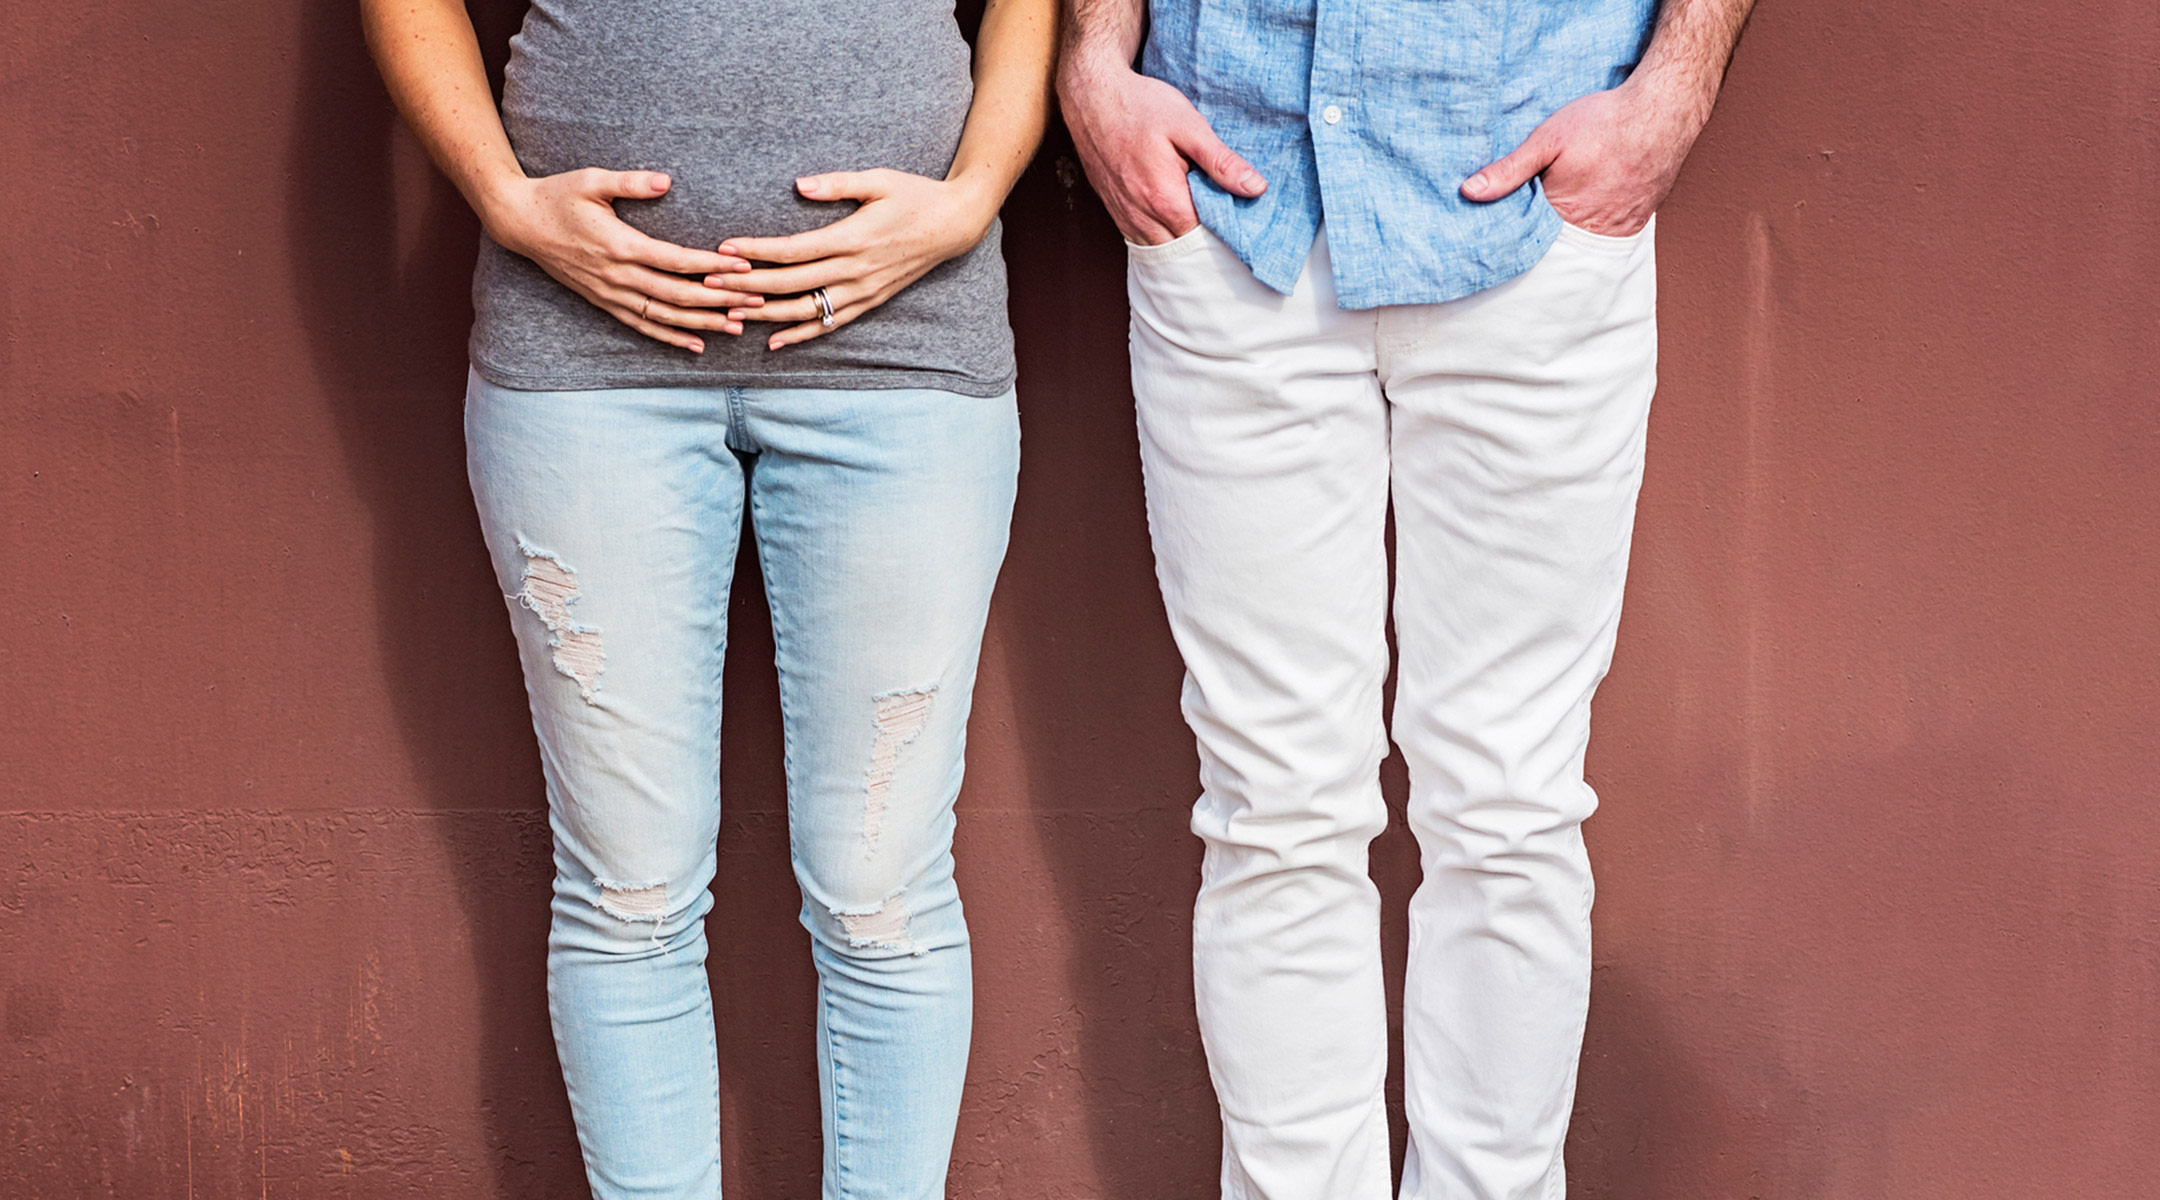 pregnant woman with her hands on belly standing next to her partner